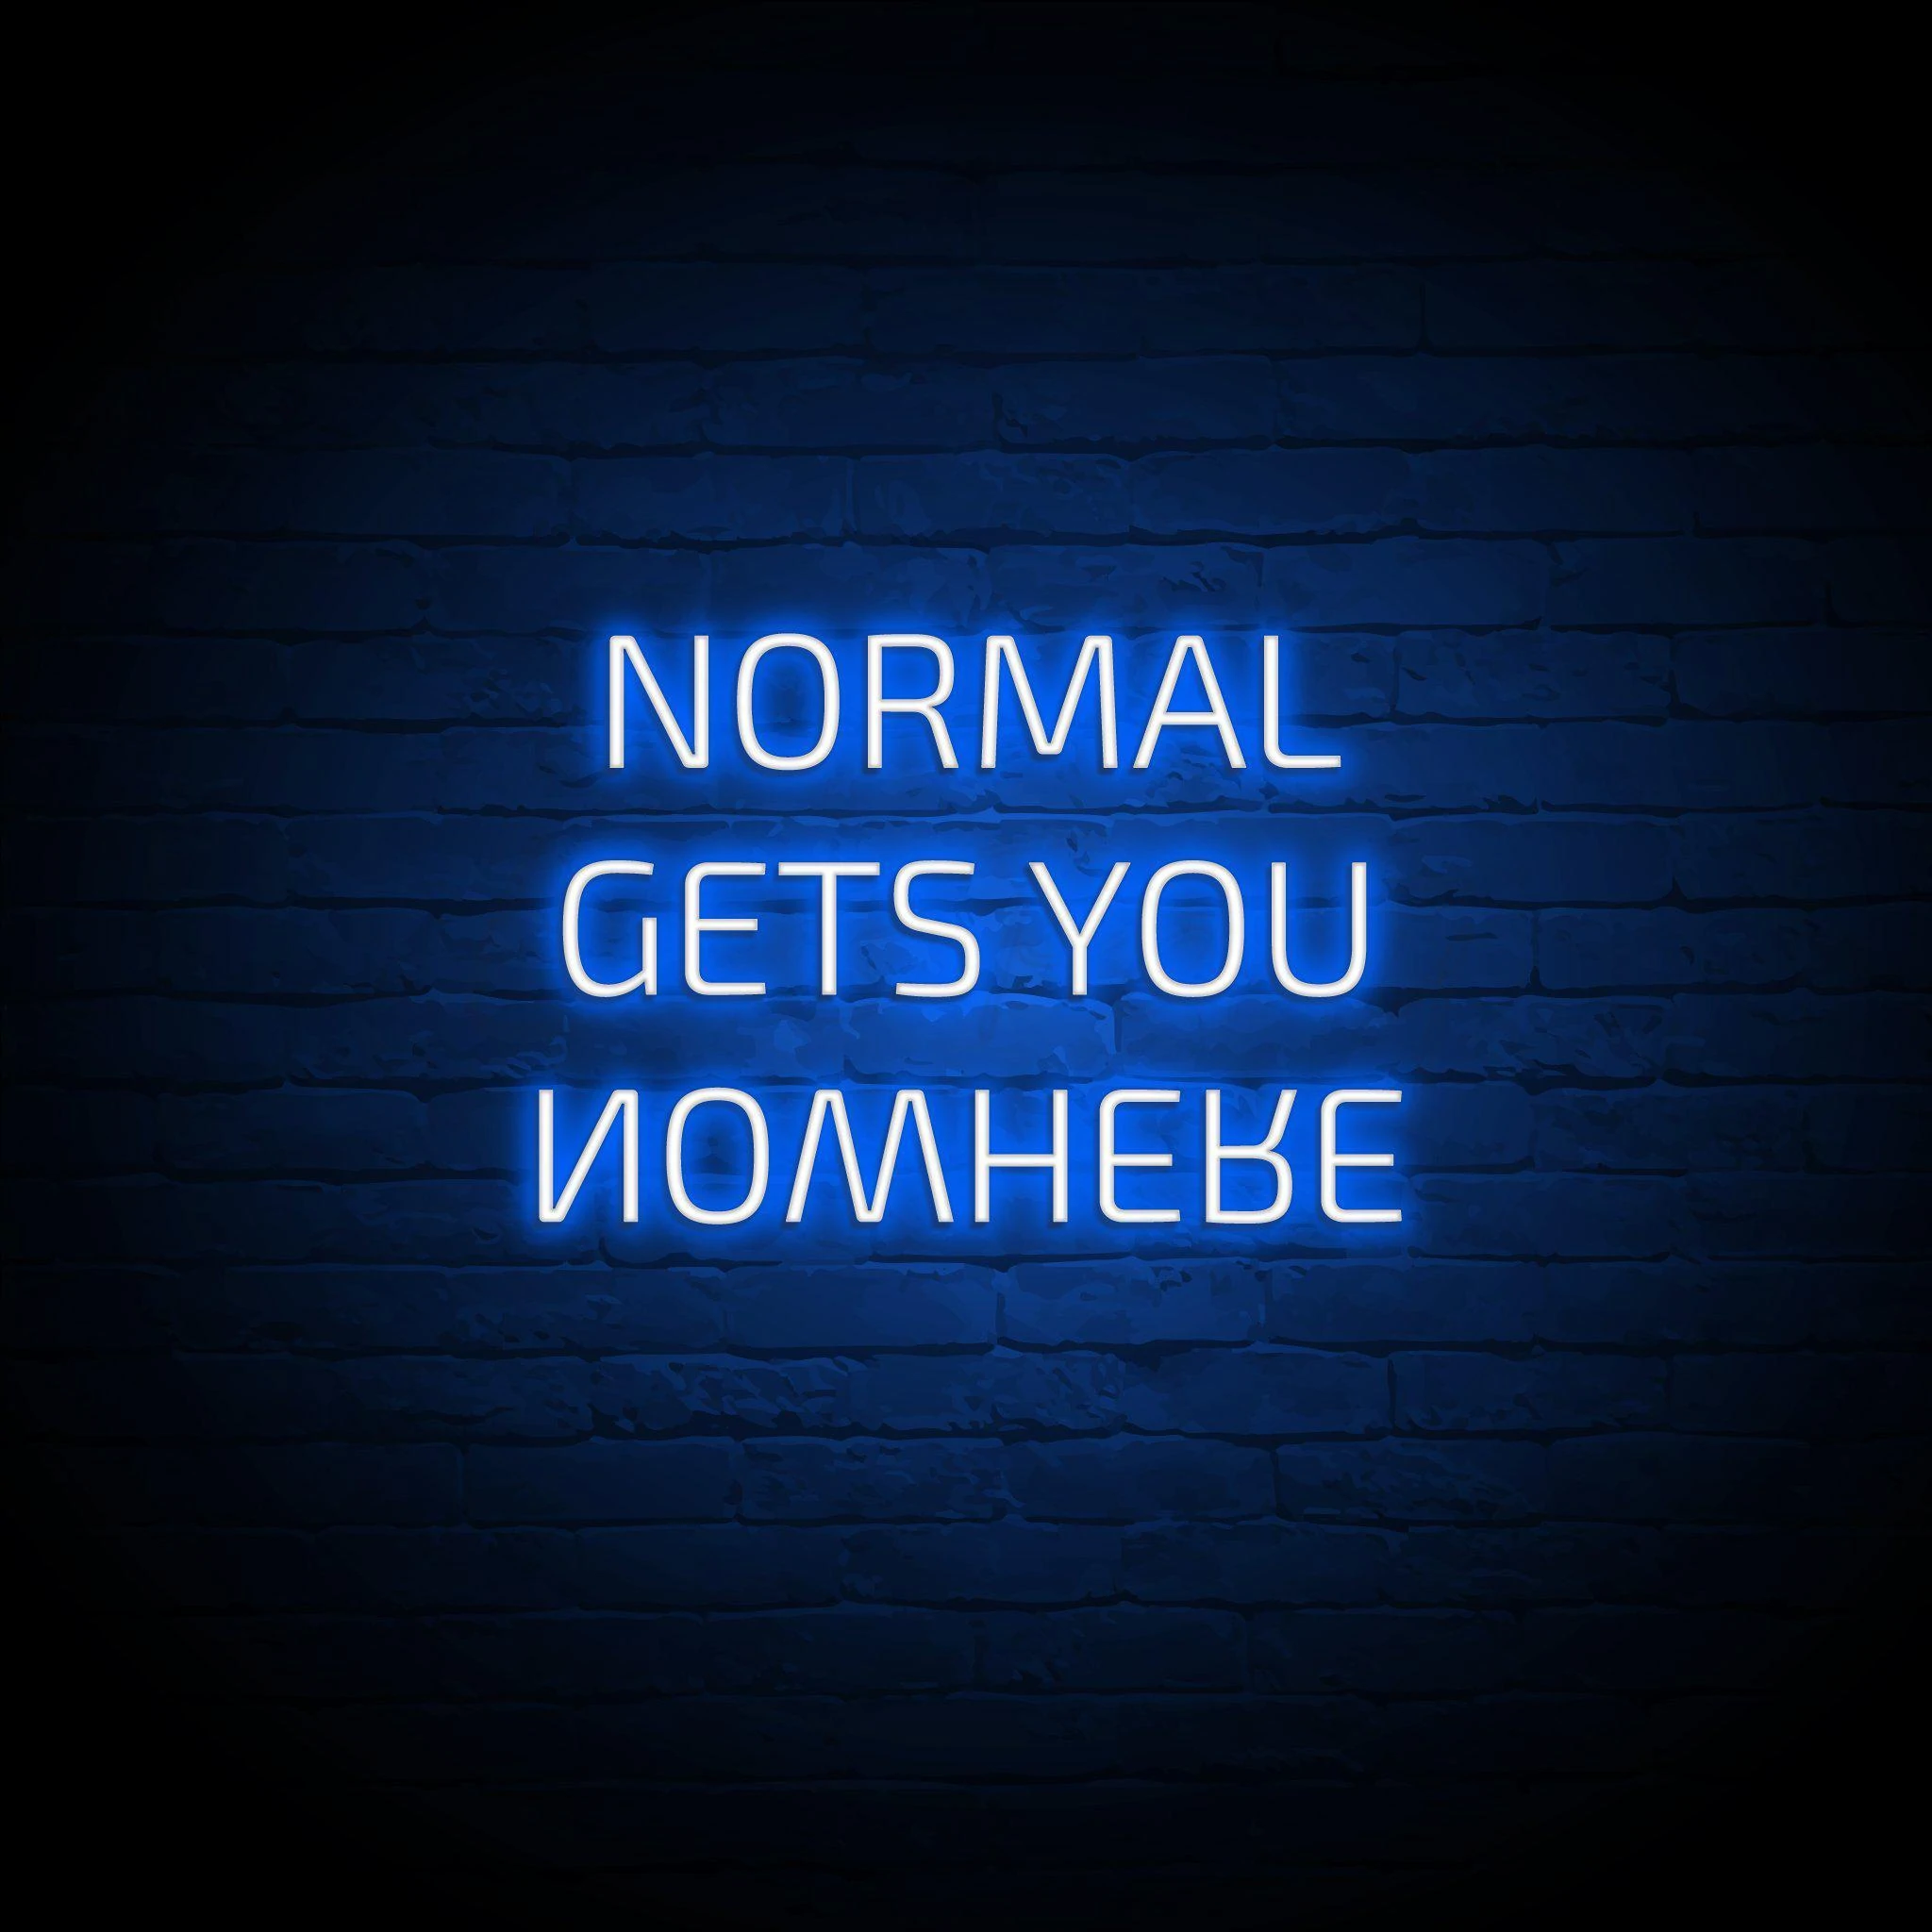 'NORMAL GETS YOU NOWHERE' NEON SIGN - NeonFerry